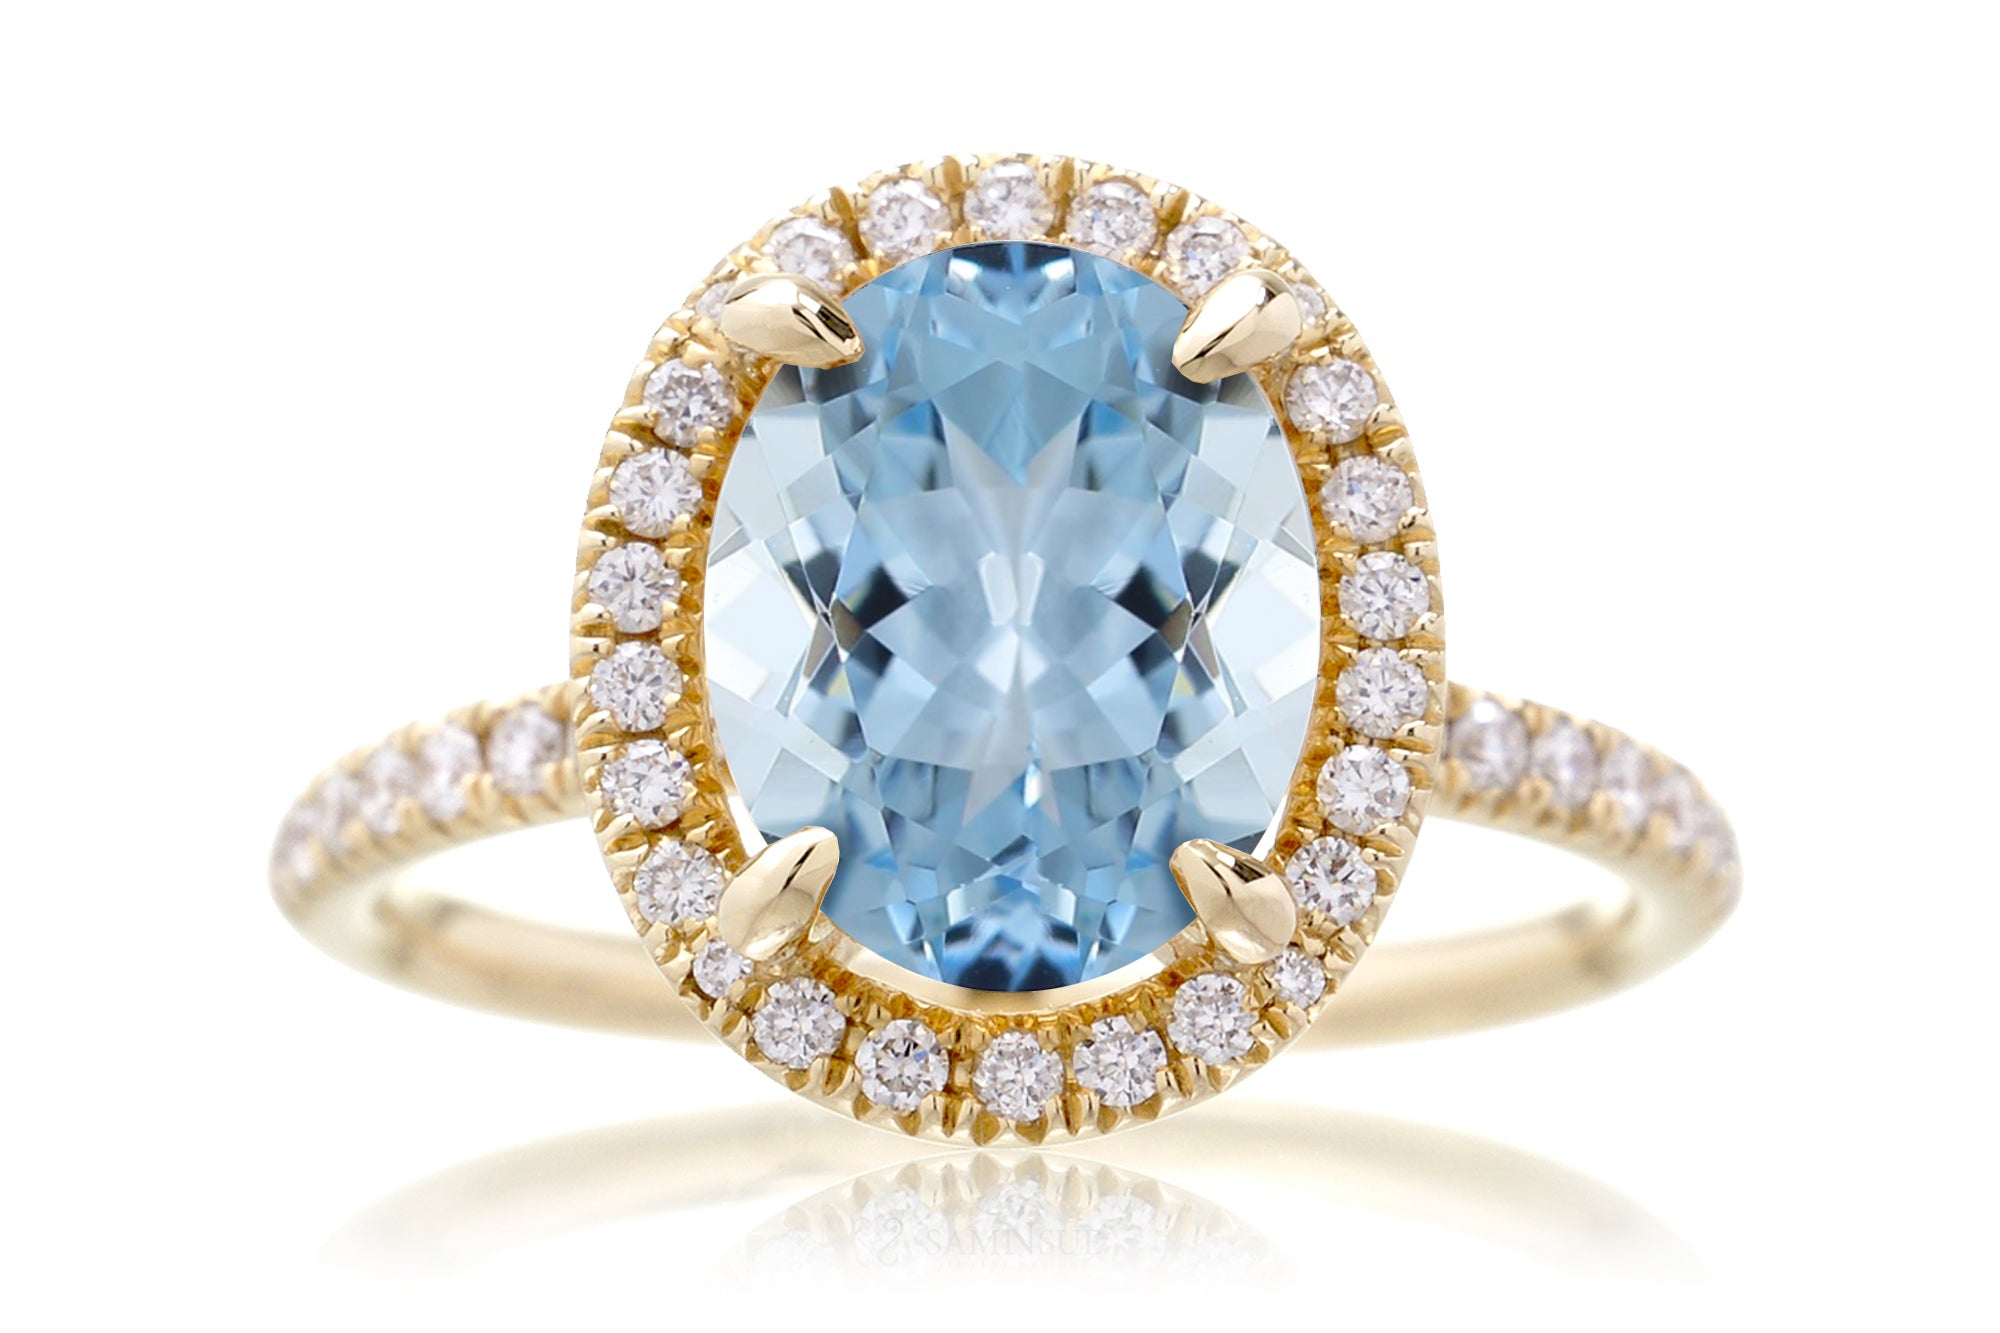 The Drenched Oval Aquamarine